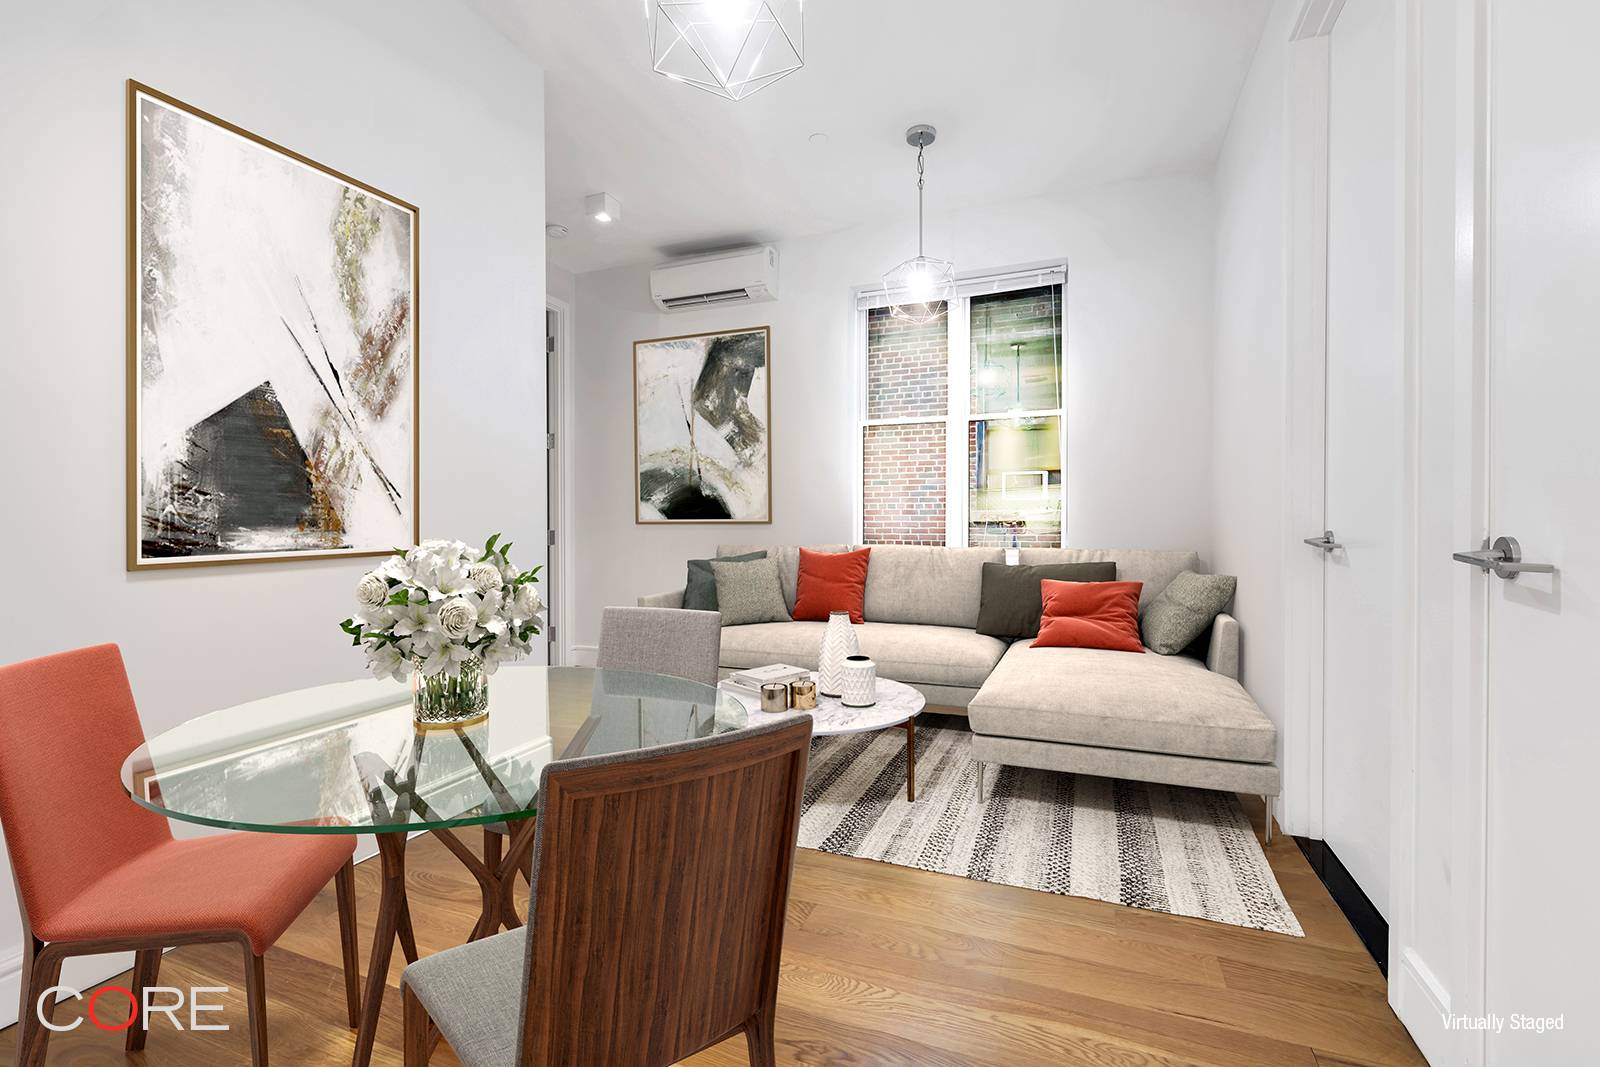 Offering a full amenity lifestyle in a one bedroom condo in Prospect Park South, this gem includes a large office fits a queen size bed, an in unit washer dryer, ...